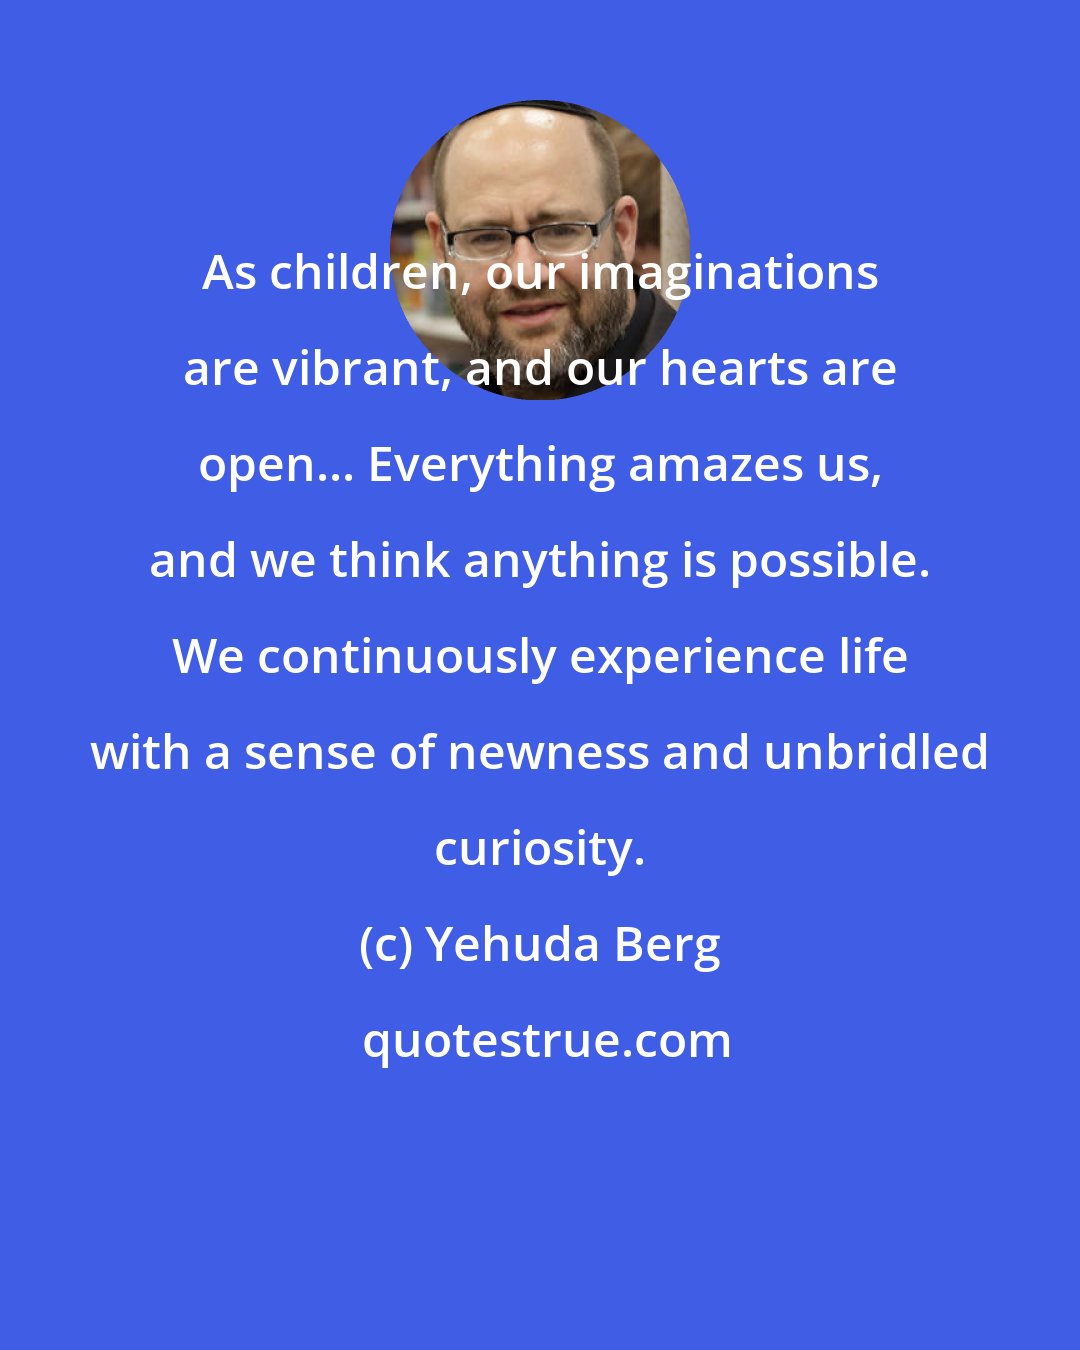 Yehuda Berg: As children, our imaginations are vibrant, and our hearts are open... Everything amazes us, and we think anything is possible. We continuously experience life with a sense of newness and unbridled curiosity.